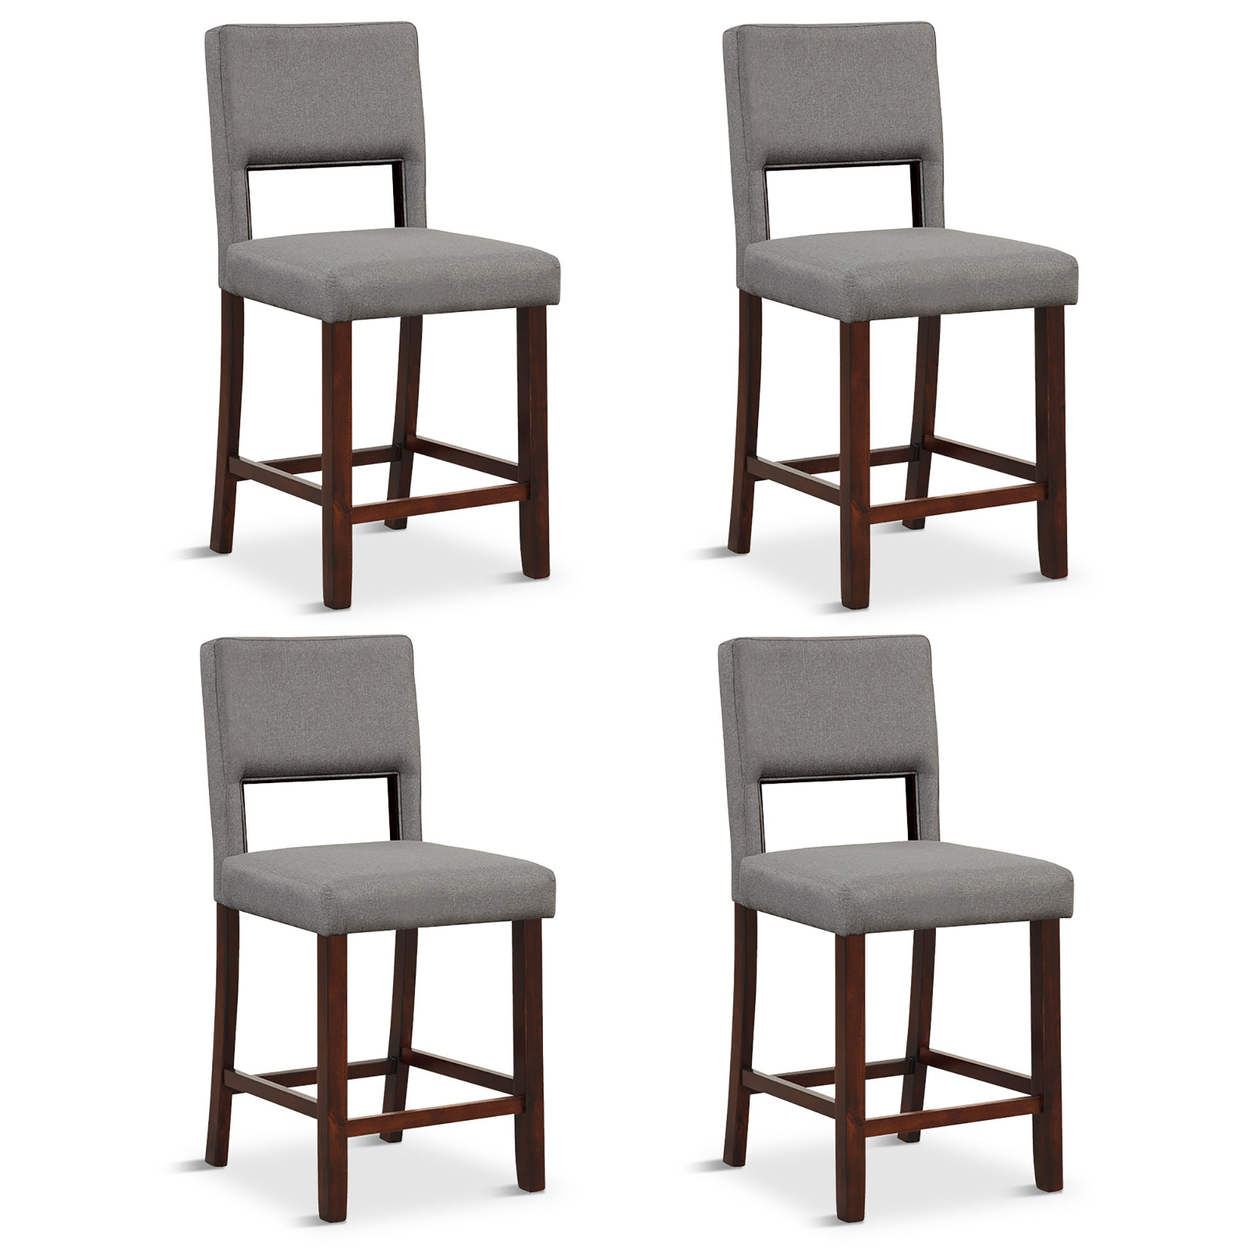 4-Piece Linen Fabric/PVC Leather Counter Height Bar Stool Set W/ Back & Rubber Wood Legs - Grey+Brown